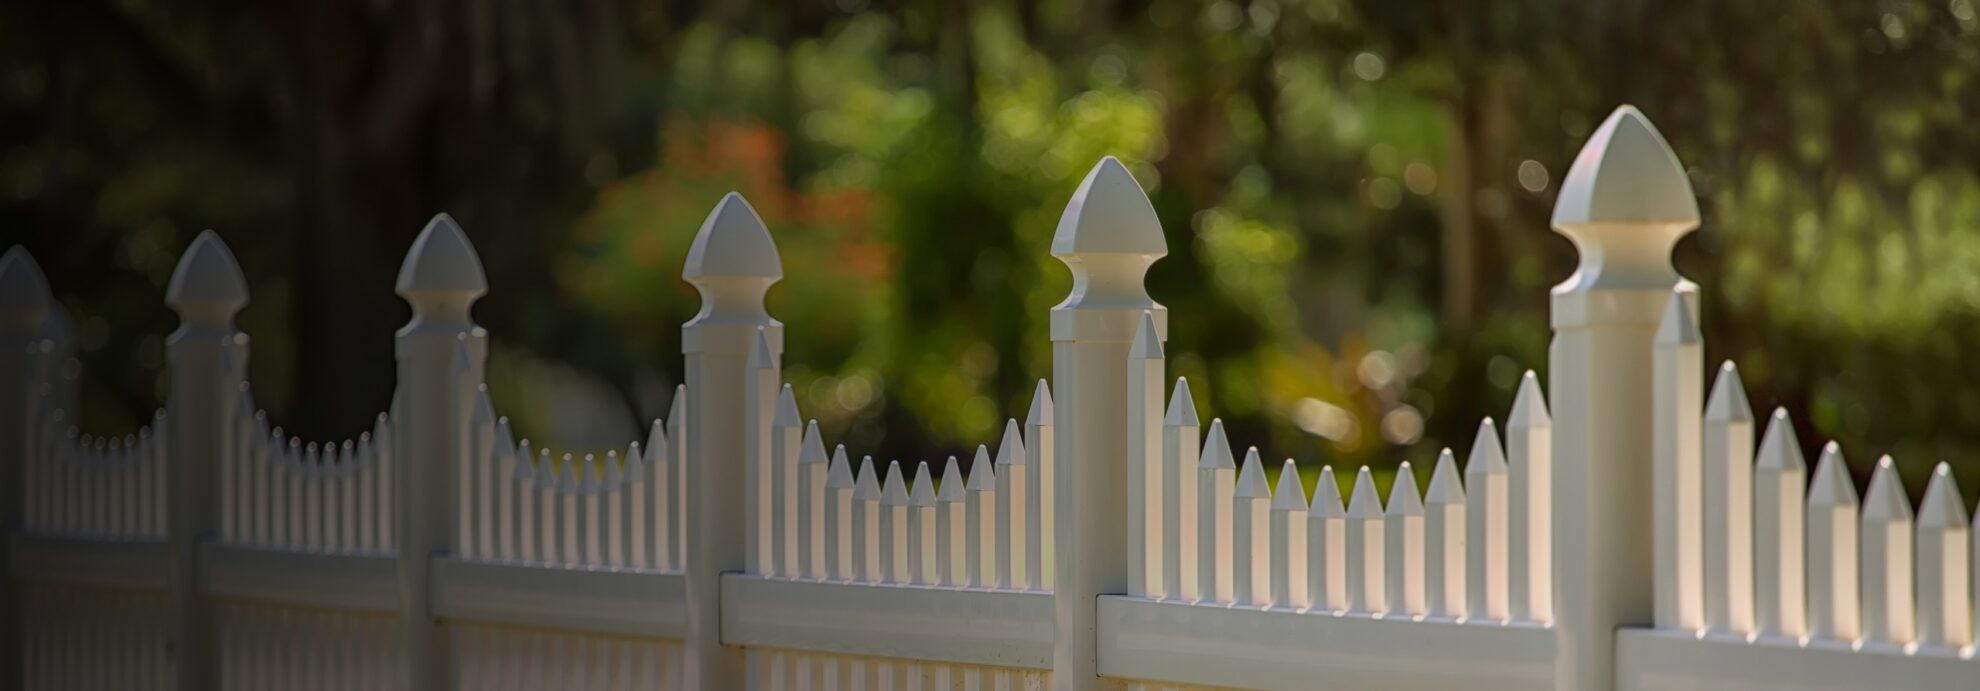 White Scalloped Vinyl Picket Fence in greeley co